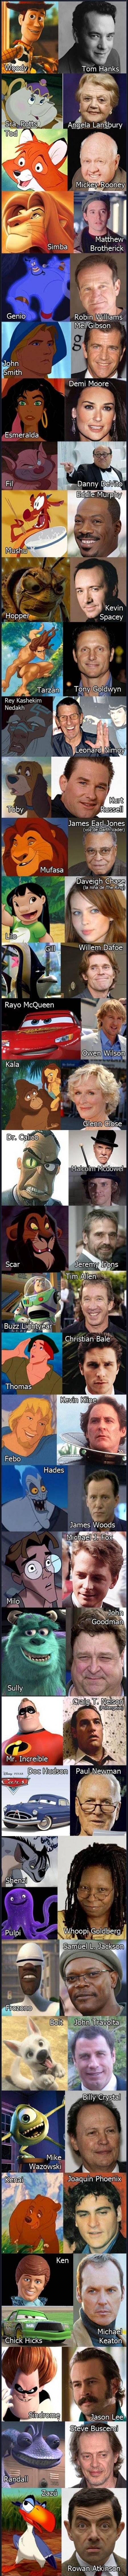 Famous Actors Who Voiced Animated Characters